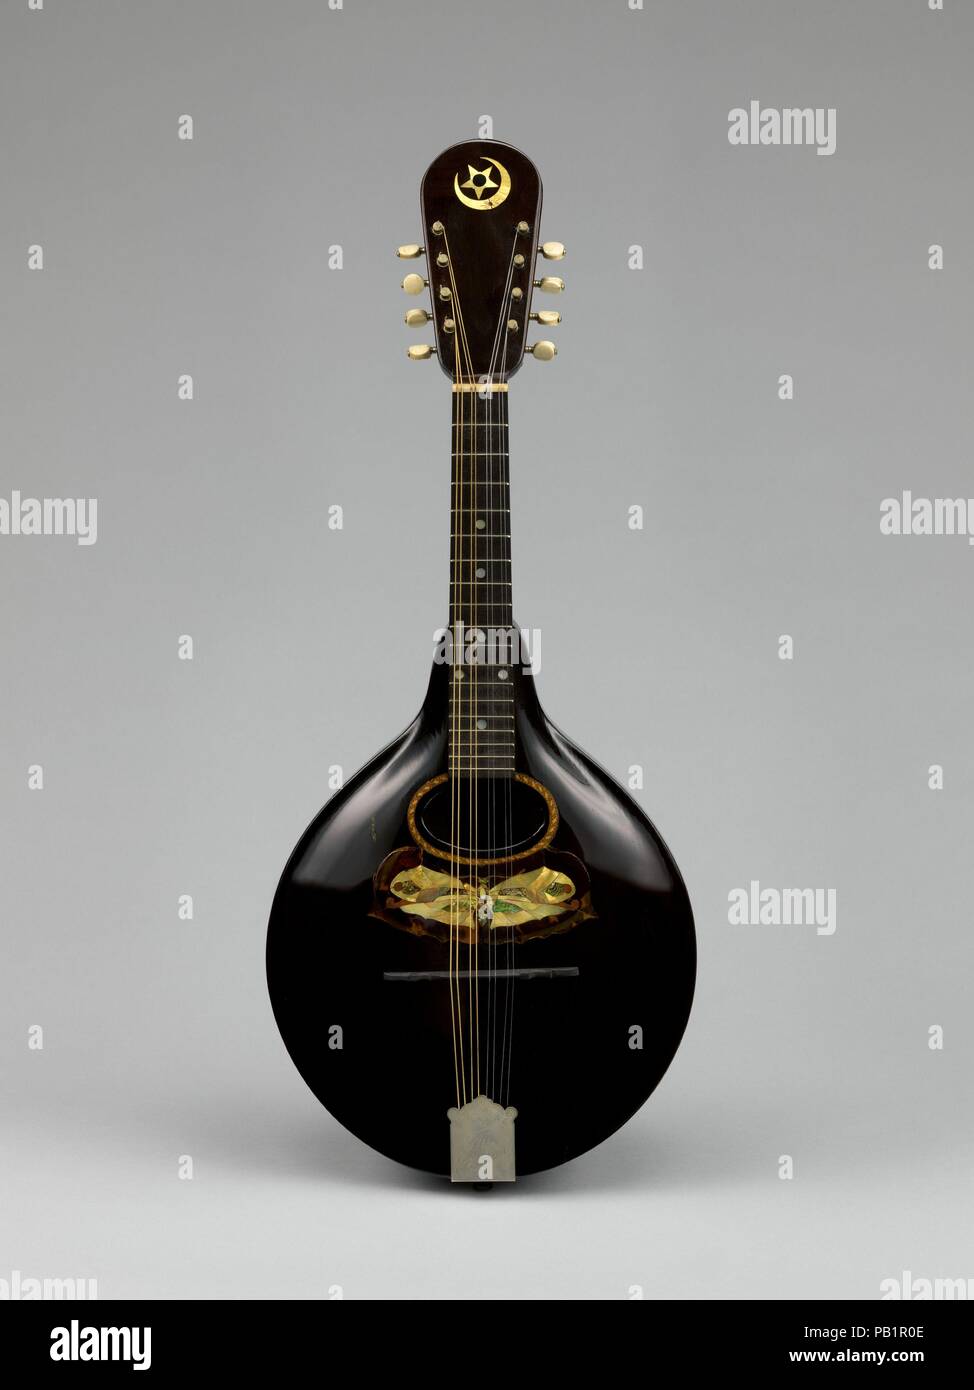 Mandolin. Culture: American. Dimensions: 26 1/4 × 11 × 3 1/4 in. (66.7 × 27.9 × 8.3 cm). Maker: Orville Gibson (American, 1856-1918). Date: 1898.  Orville Gibson is one of the most important makers and innovators of fretted stringed instruments. He is credited with the invention of the archtop guitar and mandolin, which both take construction elements from the violin. This mandolin is a rare surviving instrument by Orville Gibson and features a design consistent with his 1898 patent mandolin drawings. This includes a carved top and back with a floating bridge and tailpiece. The mandolin's side Stock Photo